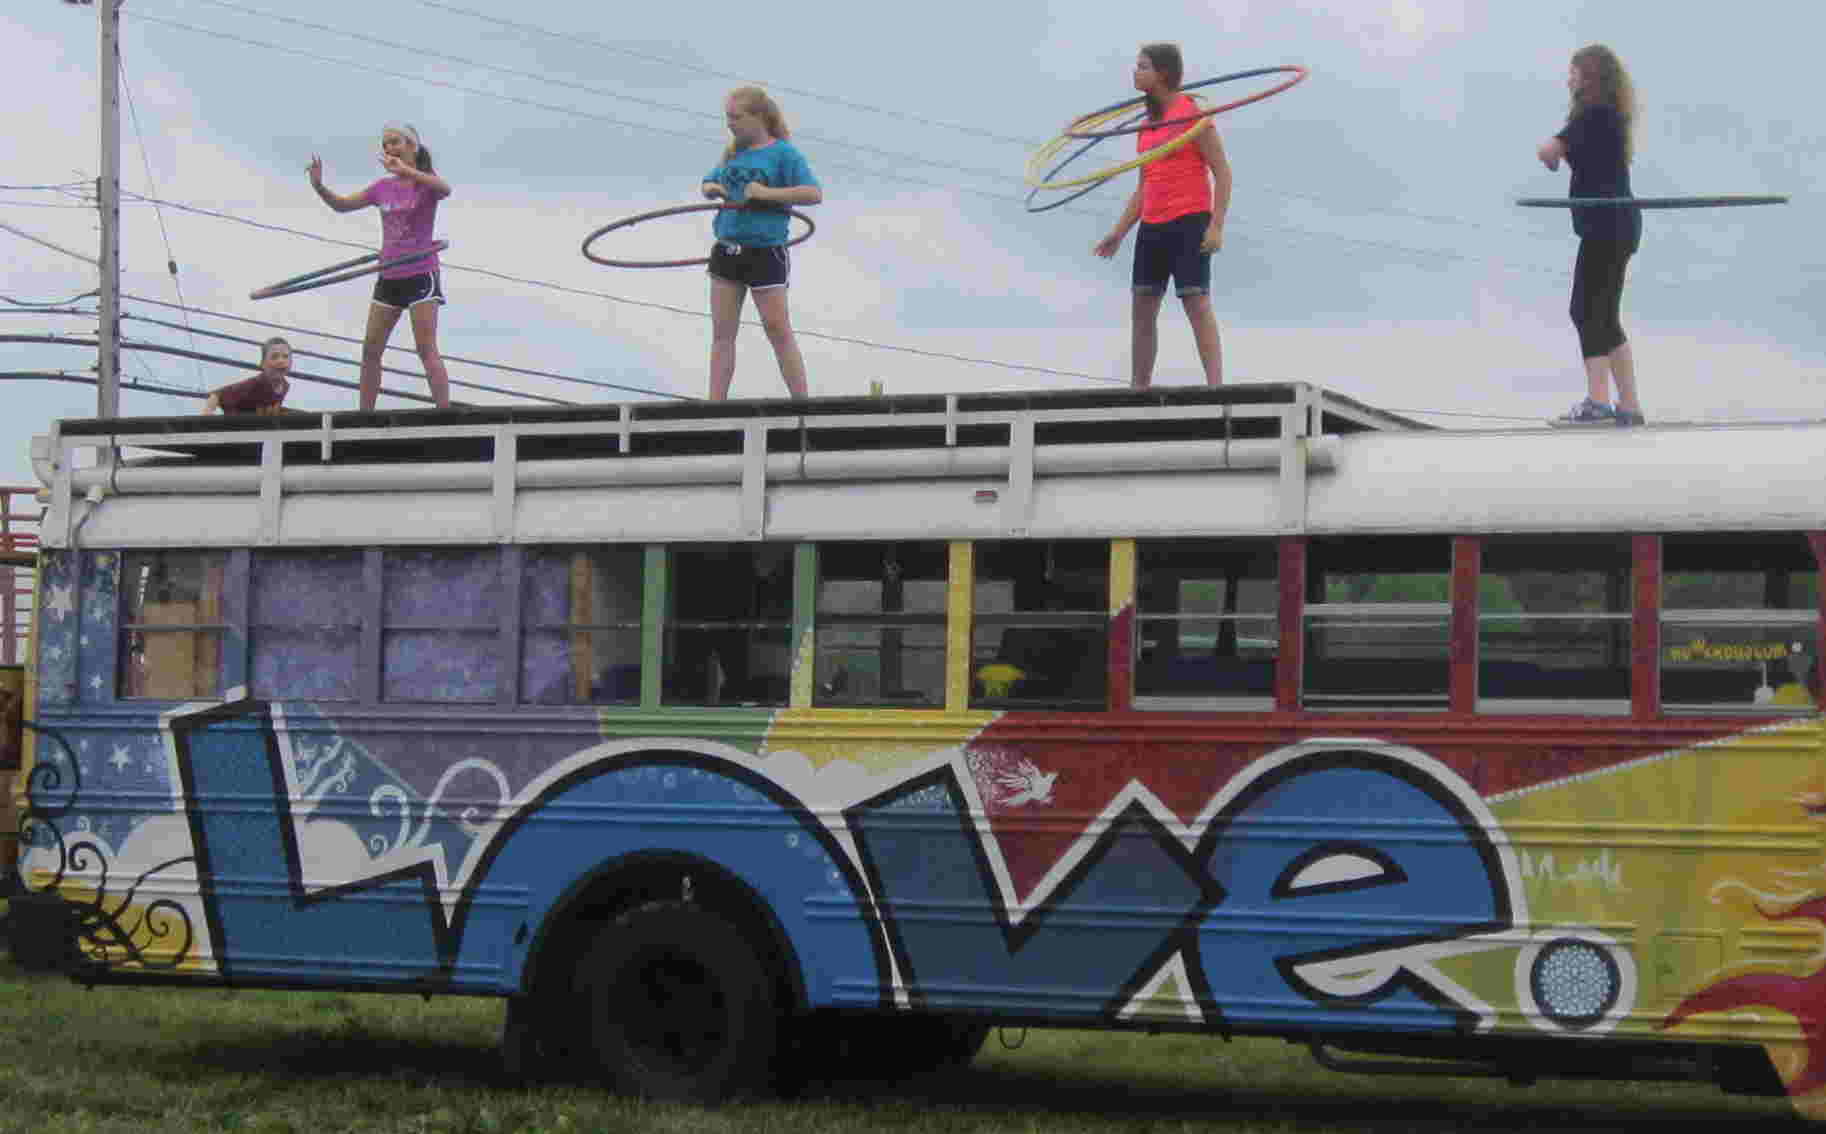 4 kids with hula hoops on top of a bus painted with a Love motif